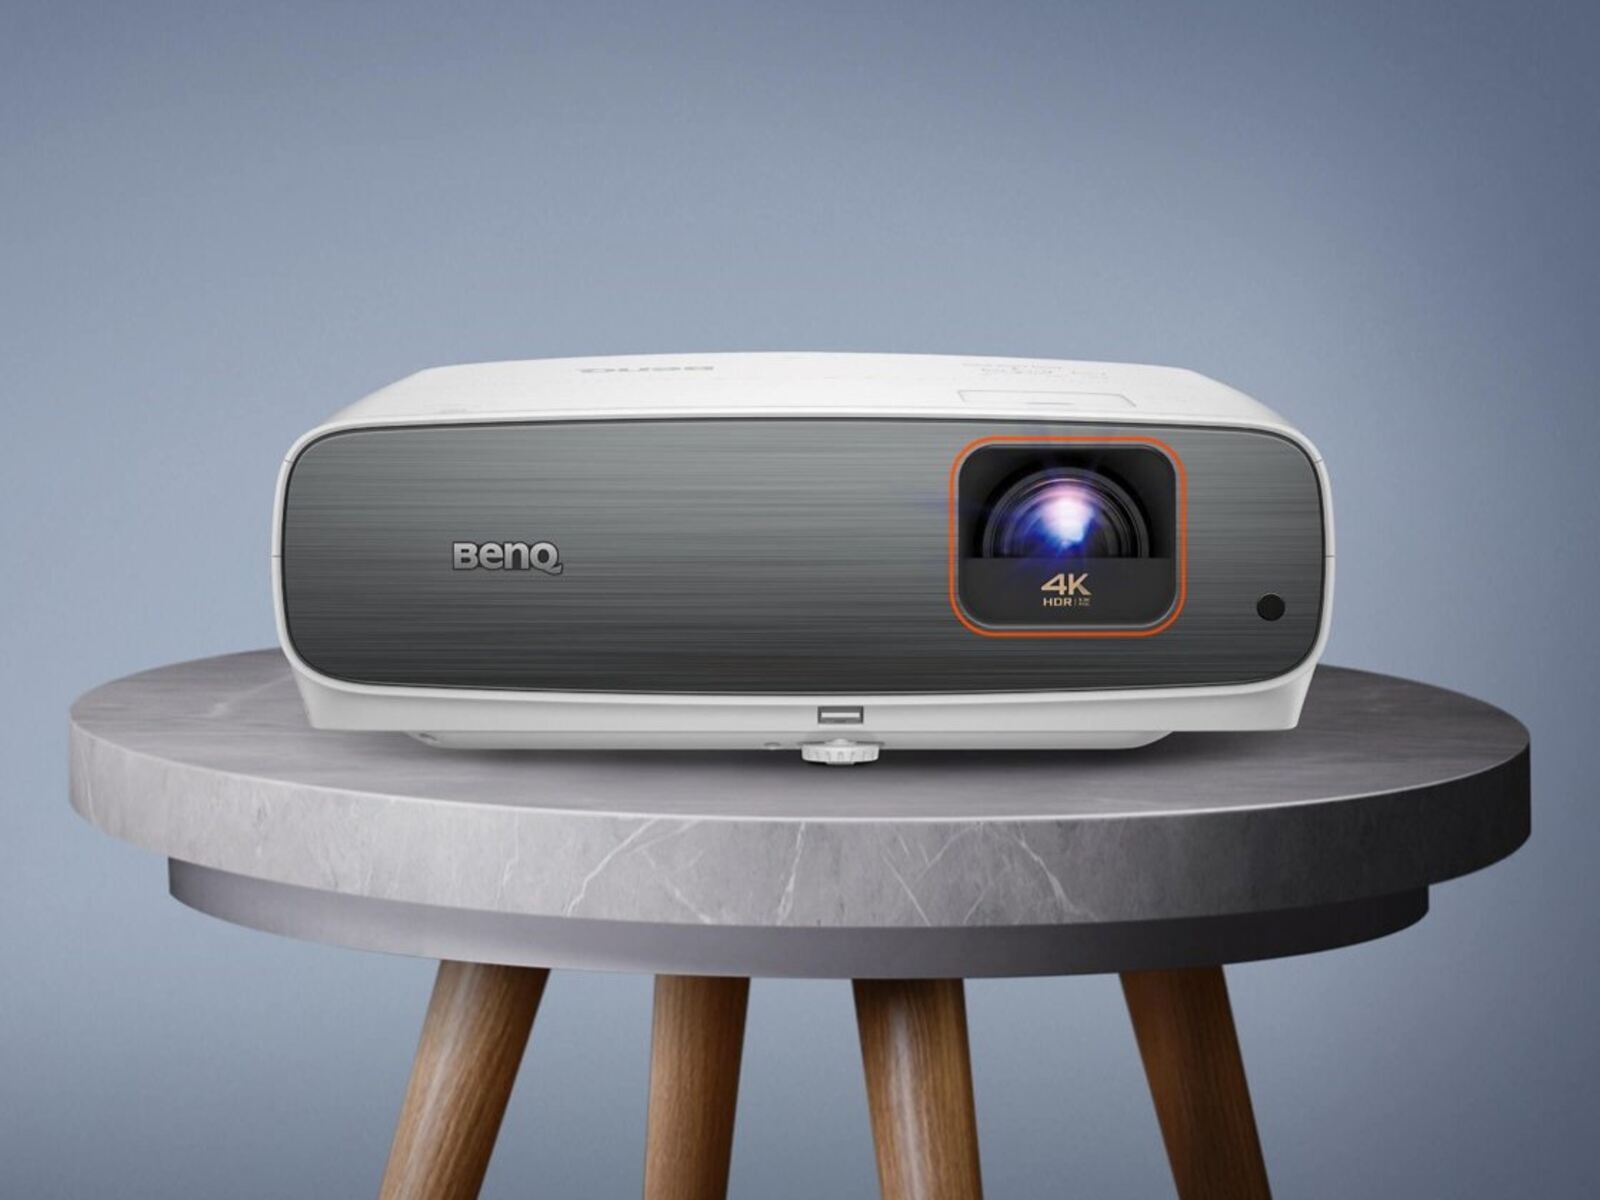 How To Use Benq Projector